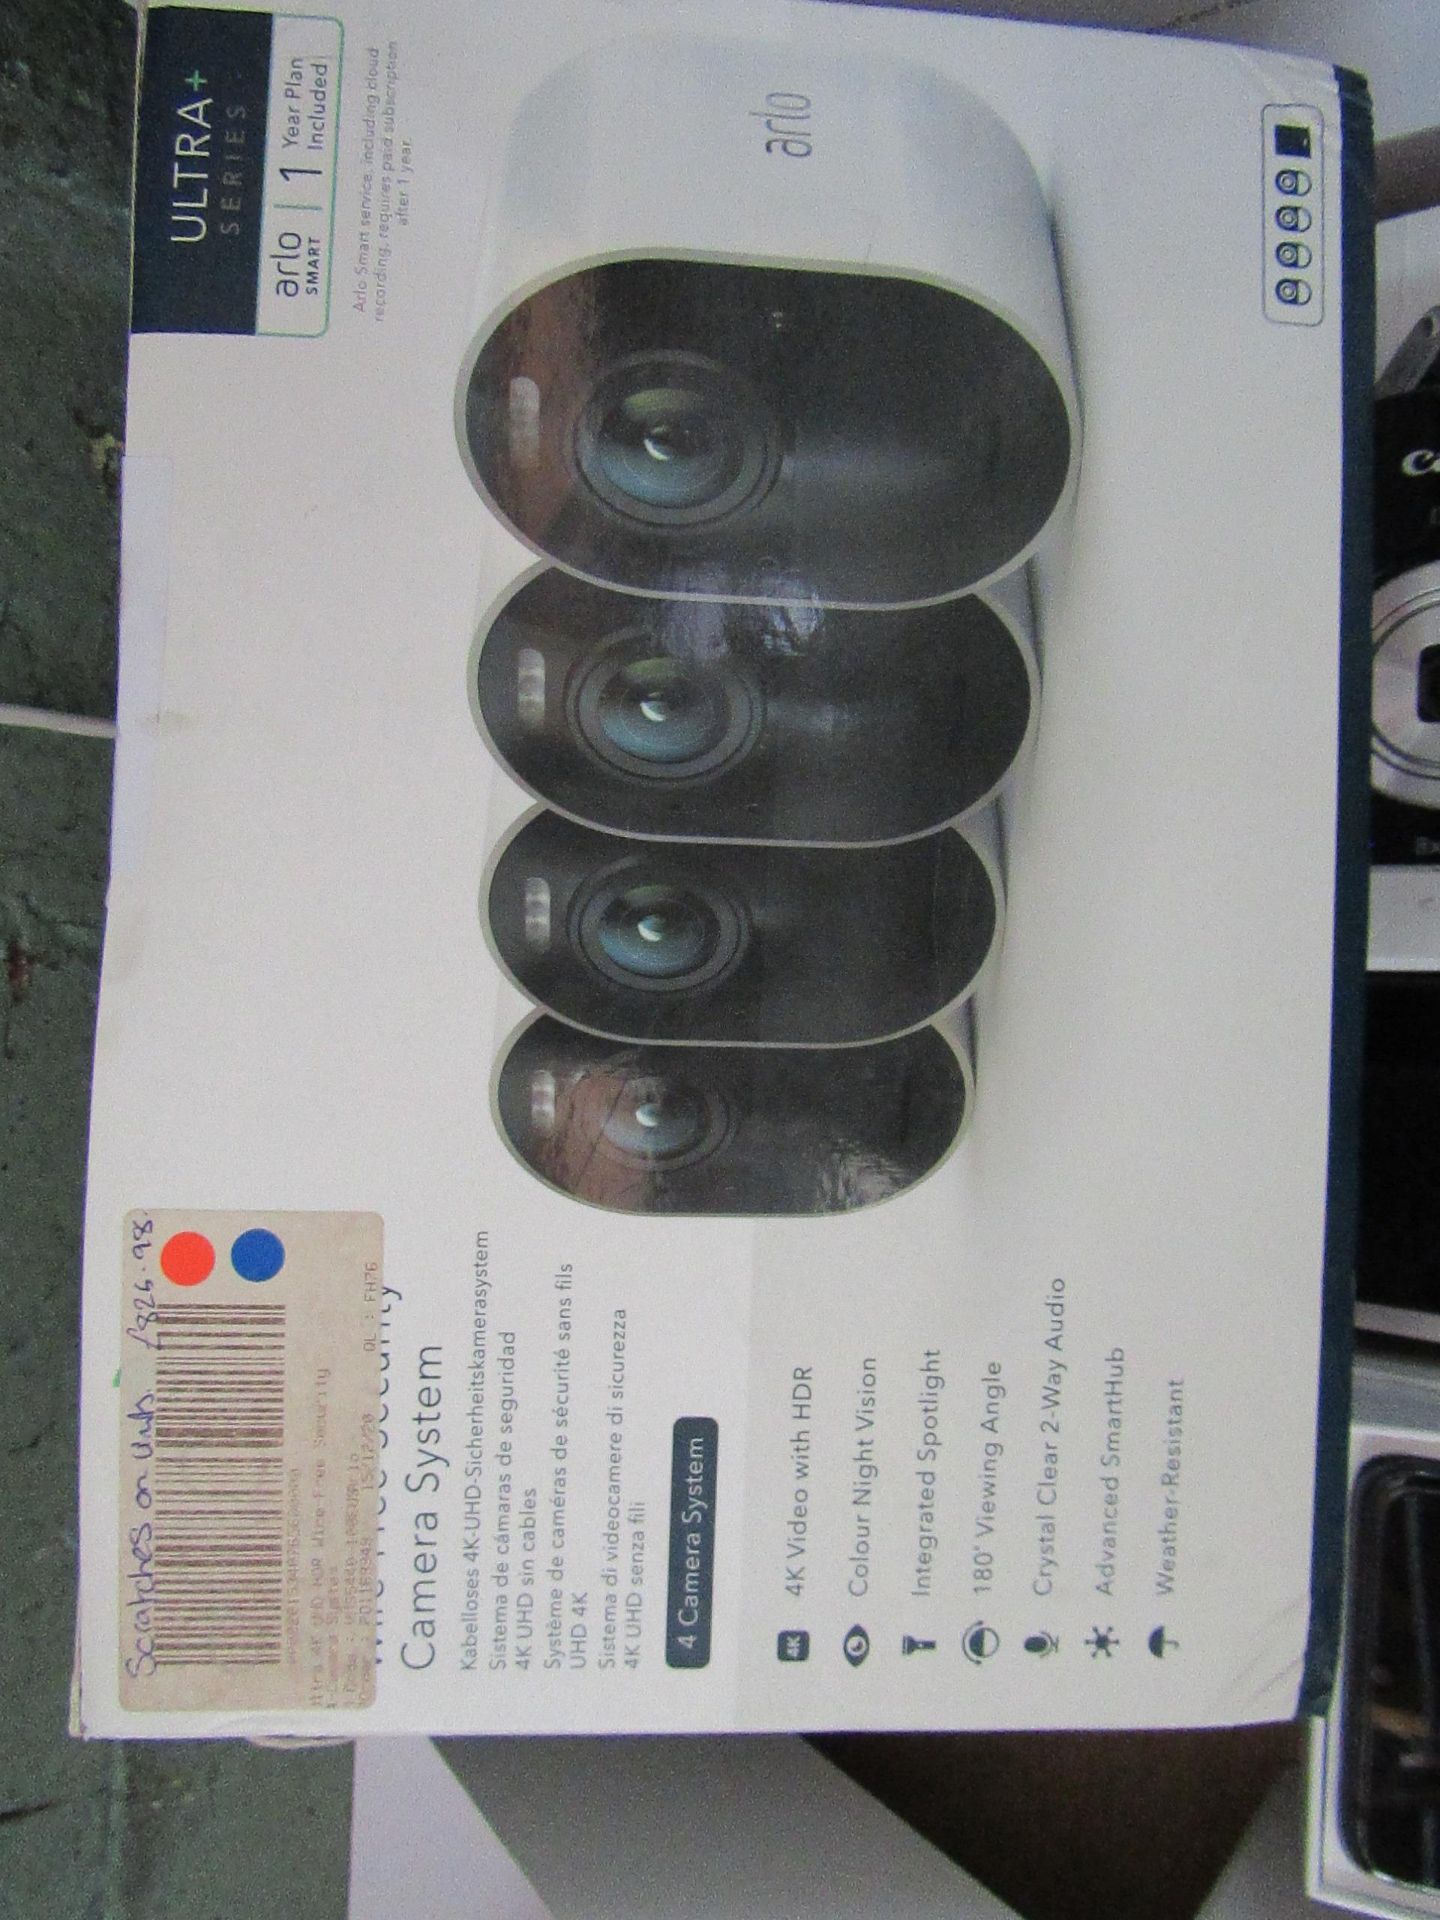 Arlo ultra series 4k wire free camera system with 4 camera system, appears to be cpomplete but